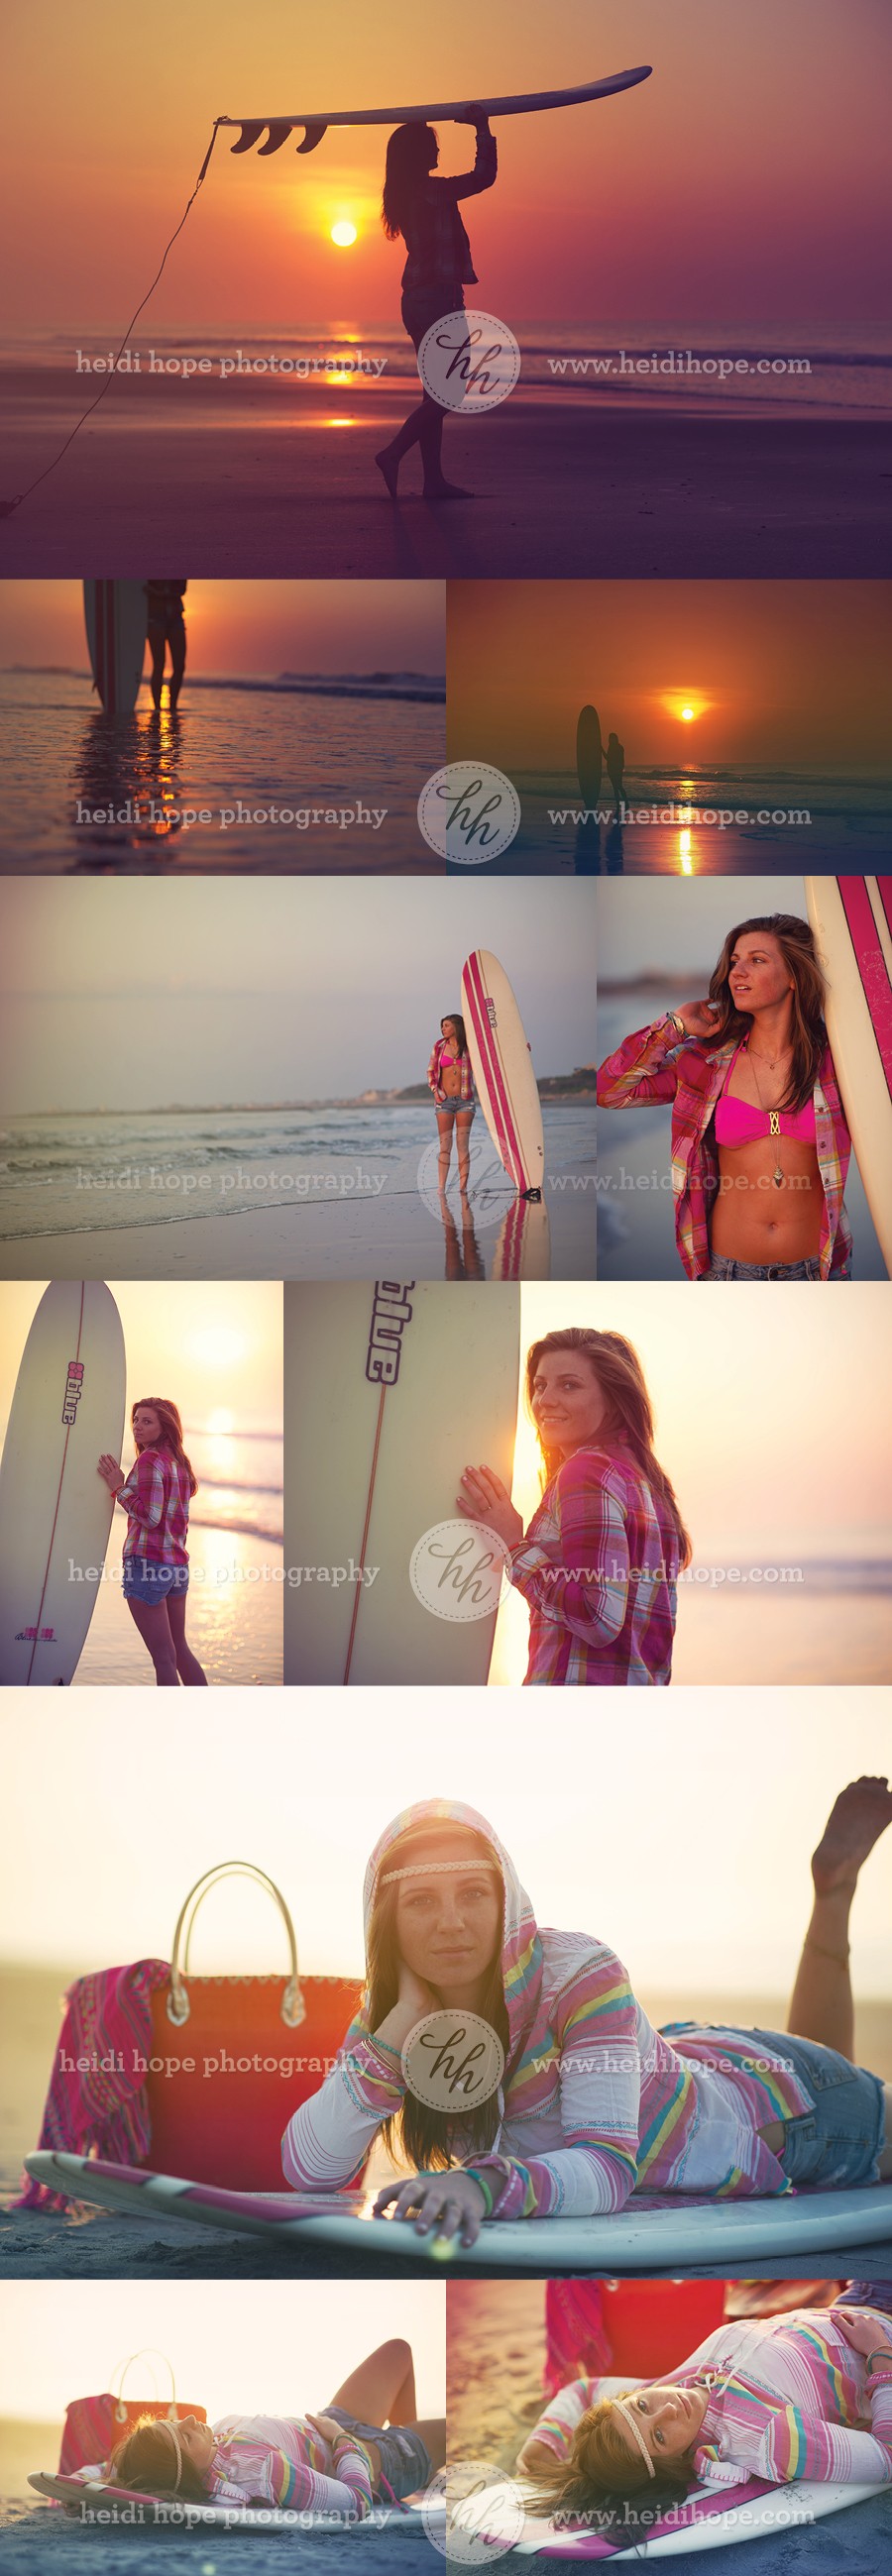 Teen Modeling and Senior Surfing Shoot on the beach by Heidi Hope Photography #surfing #surfer chic #beach style #senior shoot